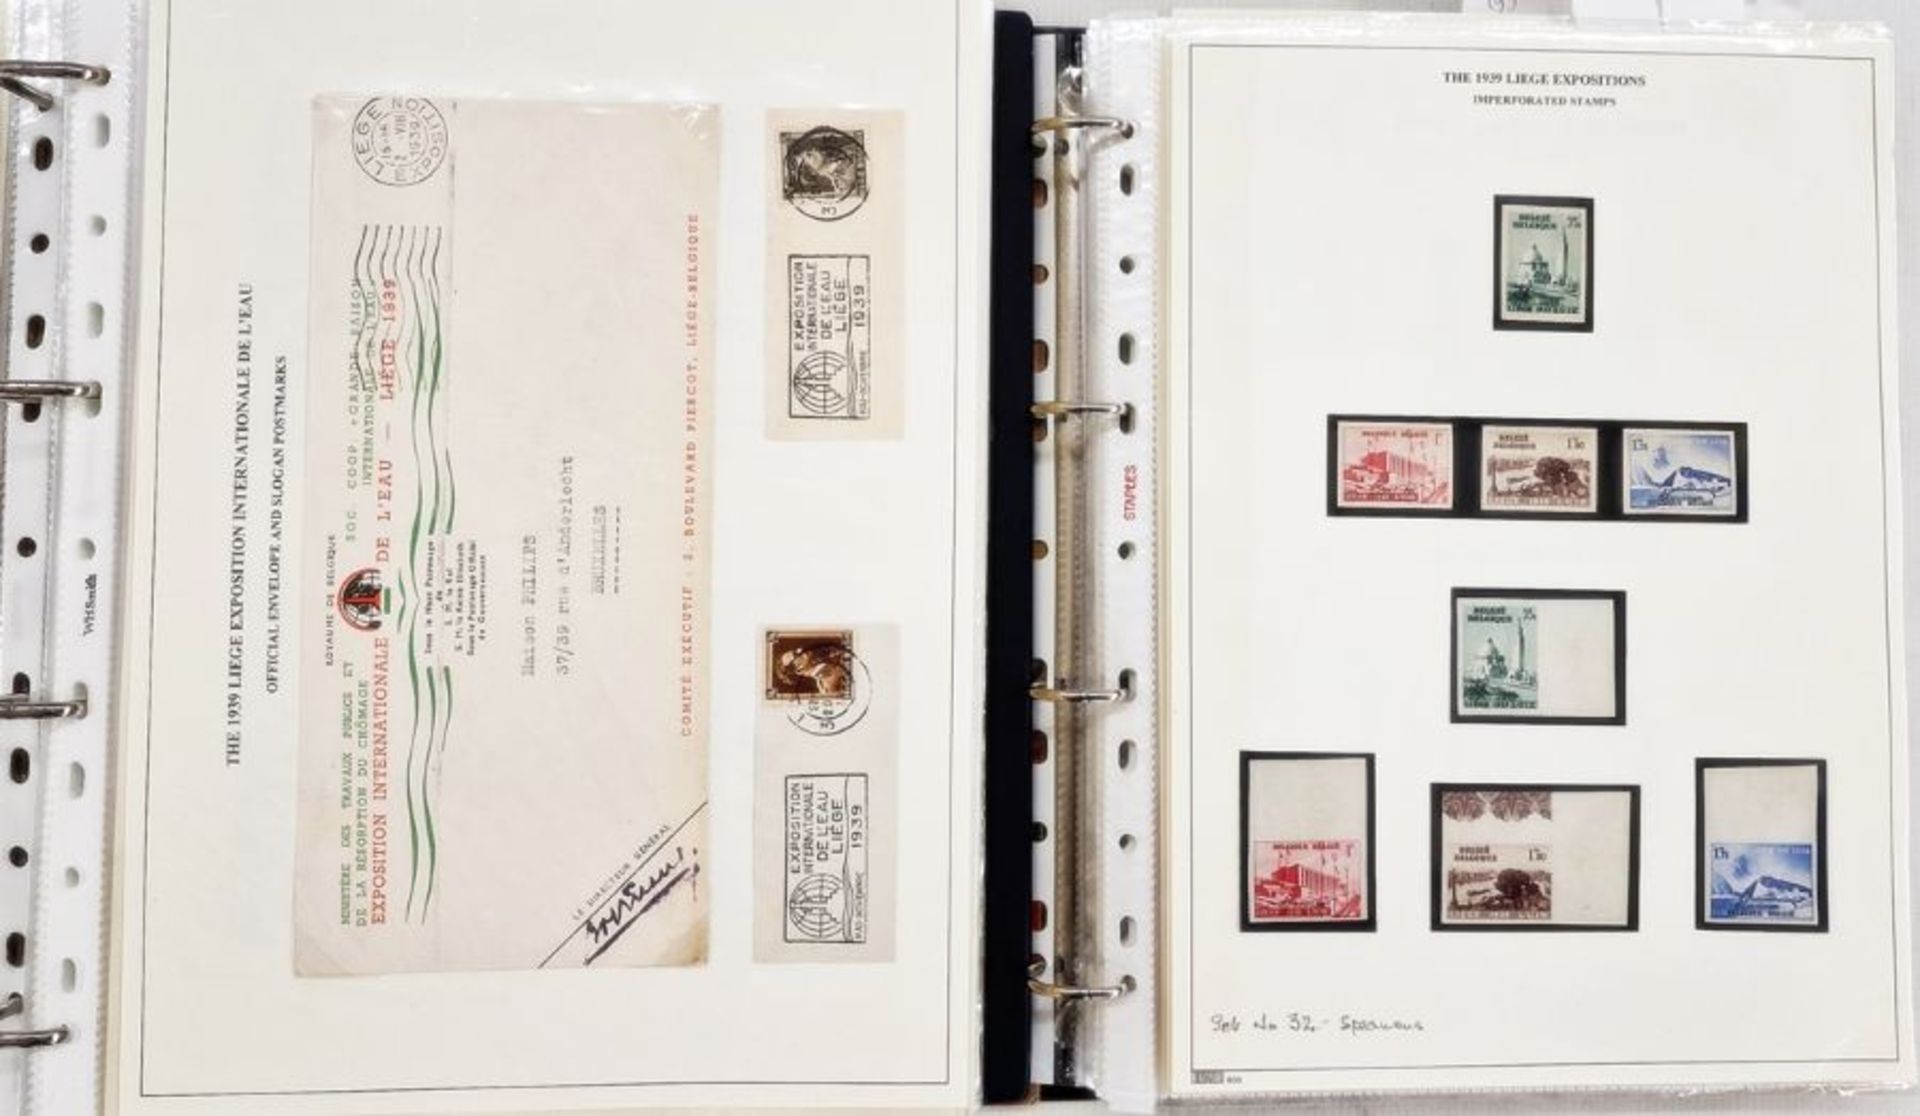 Belgium: Liege World Fair Exposition 1939 collection including mint and used definitives and - Image 9 of 14